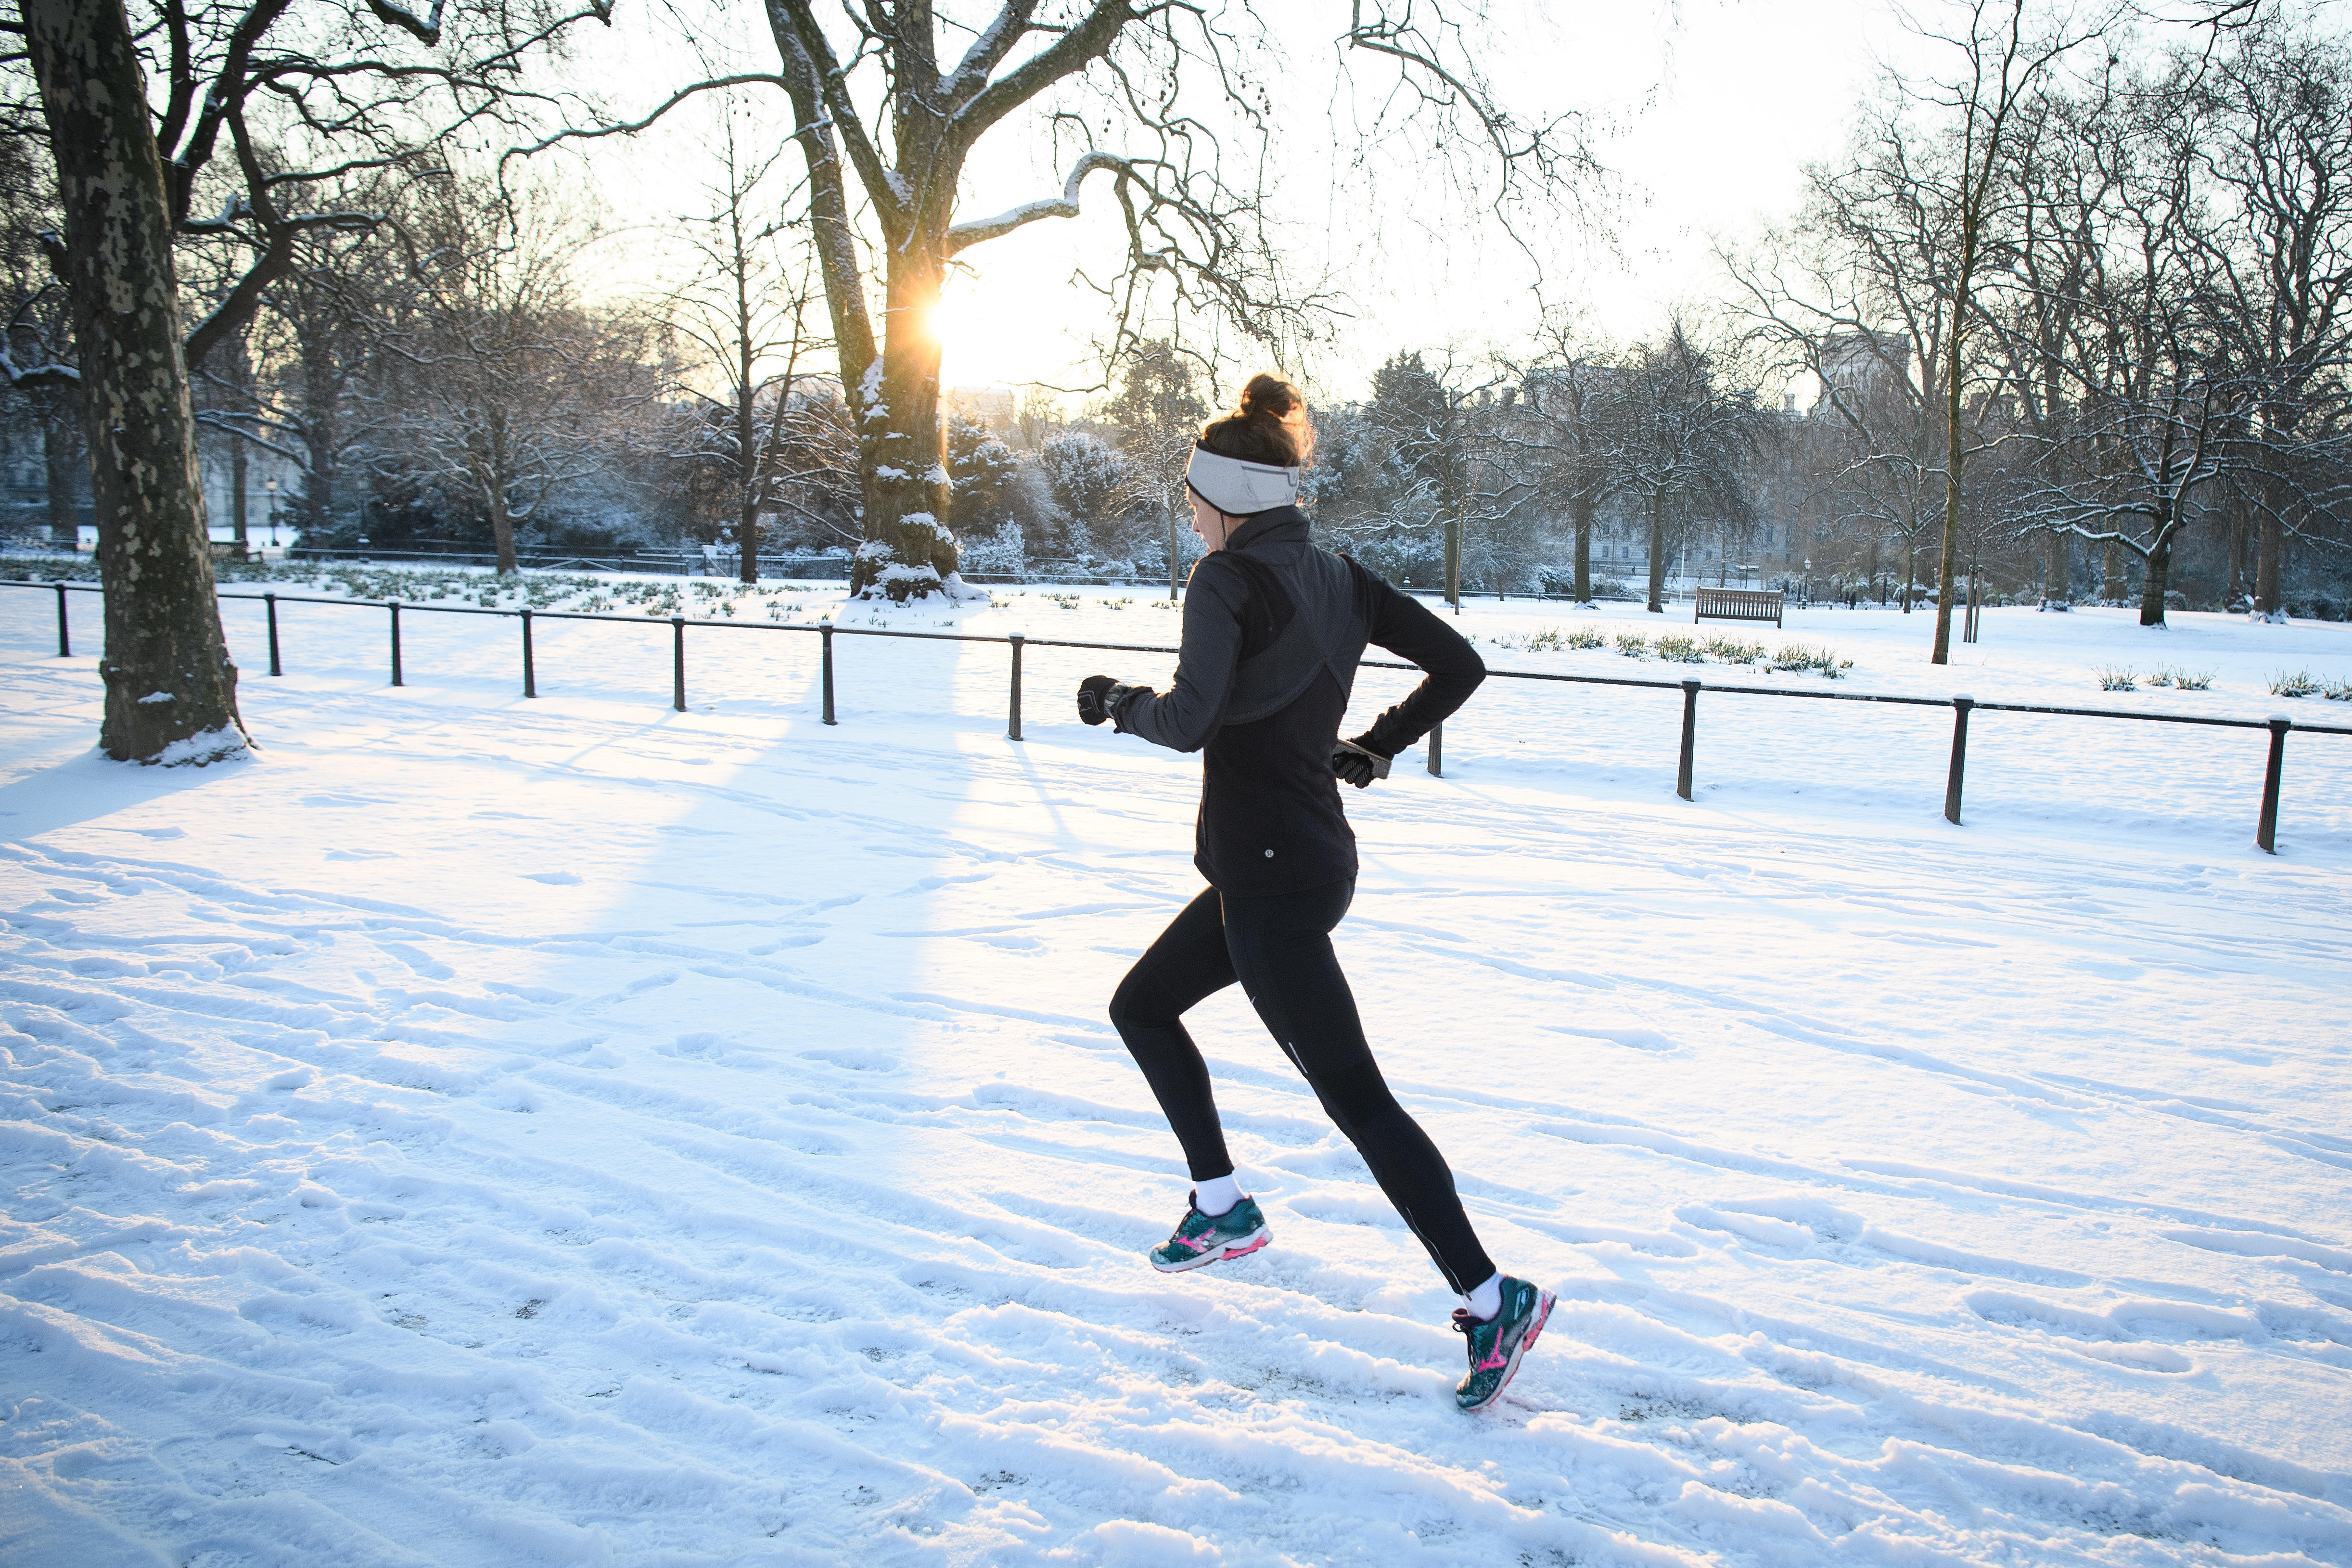 Joggers, fleece-lined leggings and other great cold-weather